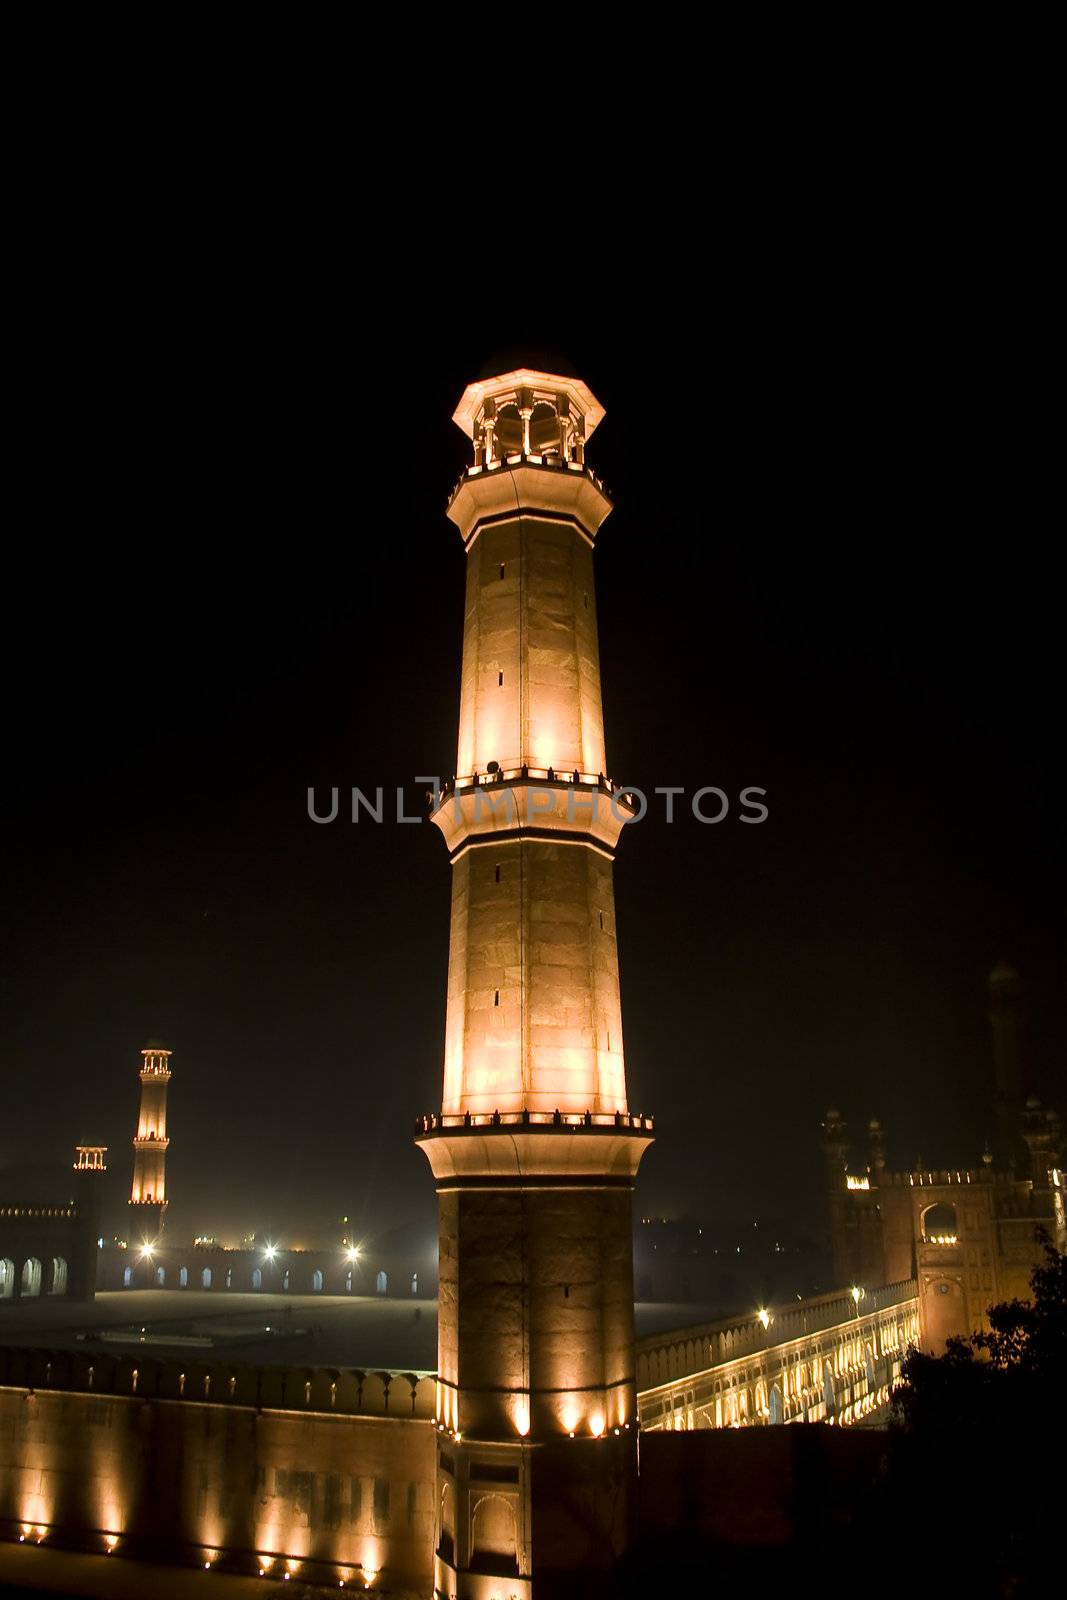 Minaret of Badshahi Mosque (King's Mosque) is one of the famous landmark in Pakistan visited by the tourists and travellers located in the city of Lahore